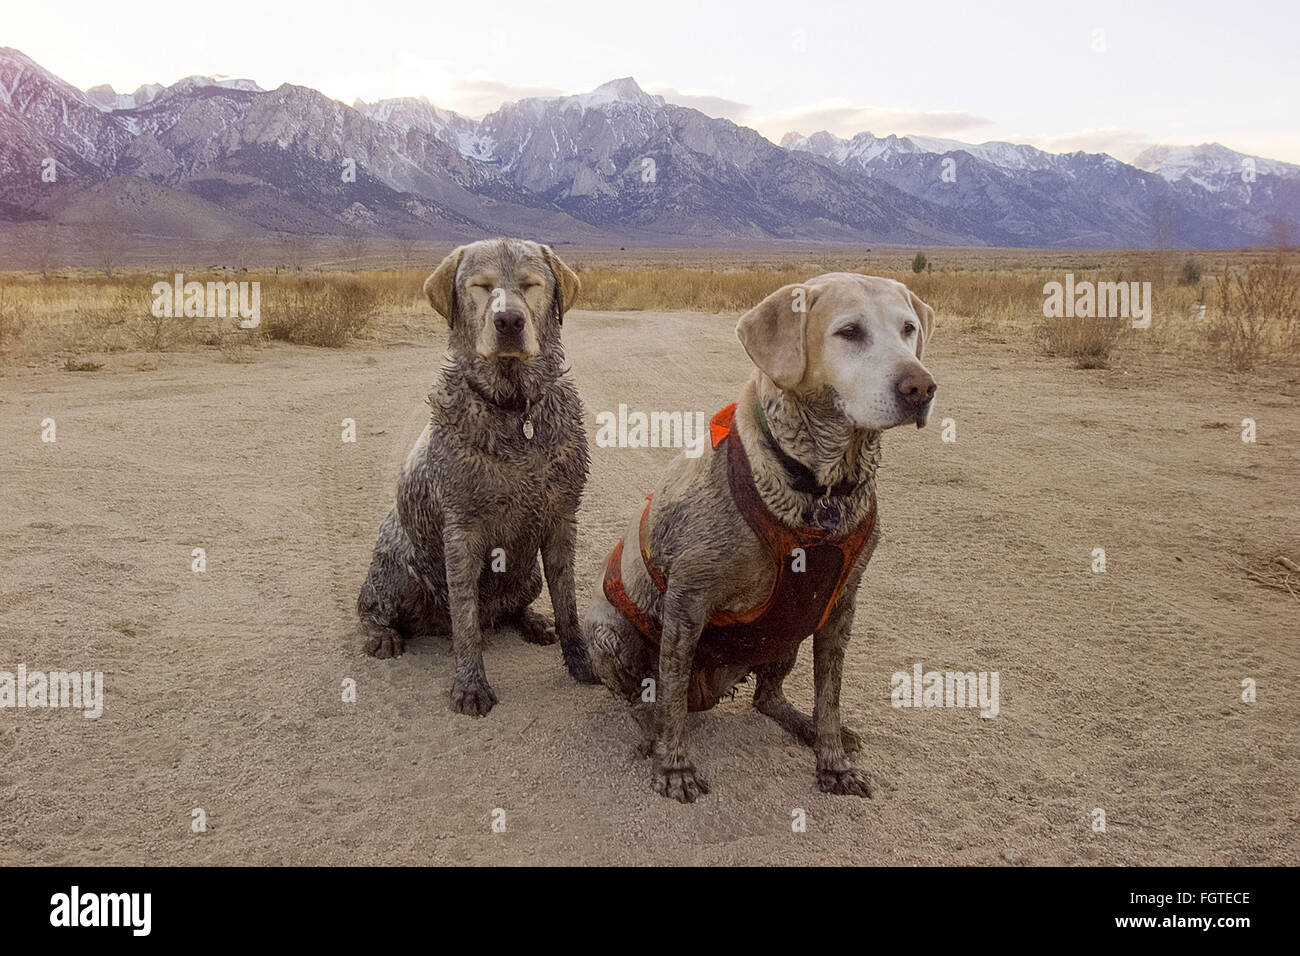 Feb. 22, 2016 - Lone Pine, California, U.S - The Labrador retriever is America's most popular dog breed for the 25th consecutive year, the American Kennel Club announced Monday. FILE 2000  Teddy and Aja rest after a hard day of pheasant hunting at a ranch in Lone Pine. Spring fed bogs made for muddy dogs. Photographer Jebb Harris has been living with Labradors for over 25 years. (Credit Image: © Jebb Harris via ZUMA Wire) Stock Photo